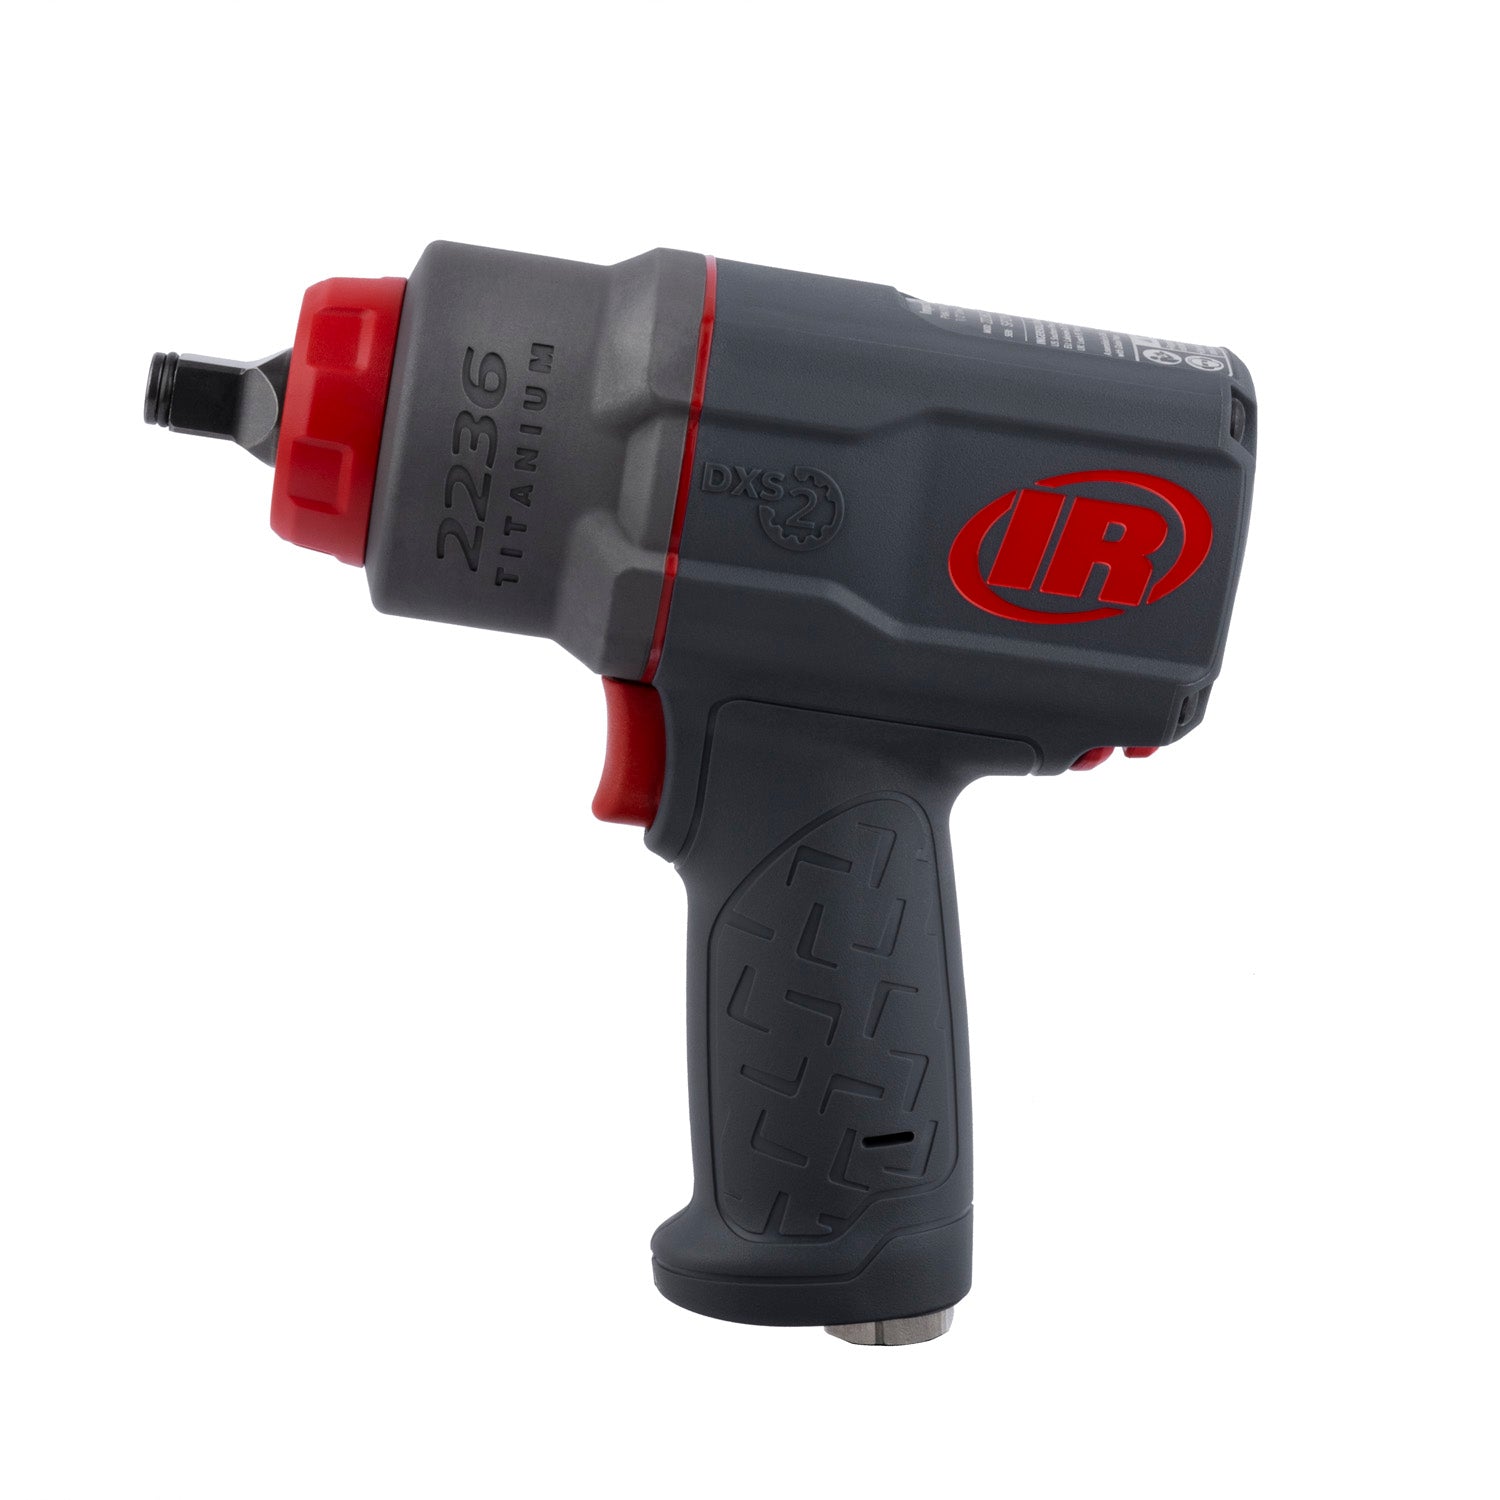 Ingersoll Rand 2236TIMAX 1/2" Pneumatic DXS 2 Impact Wrench 1500 Ft/Lb